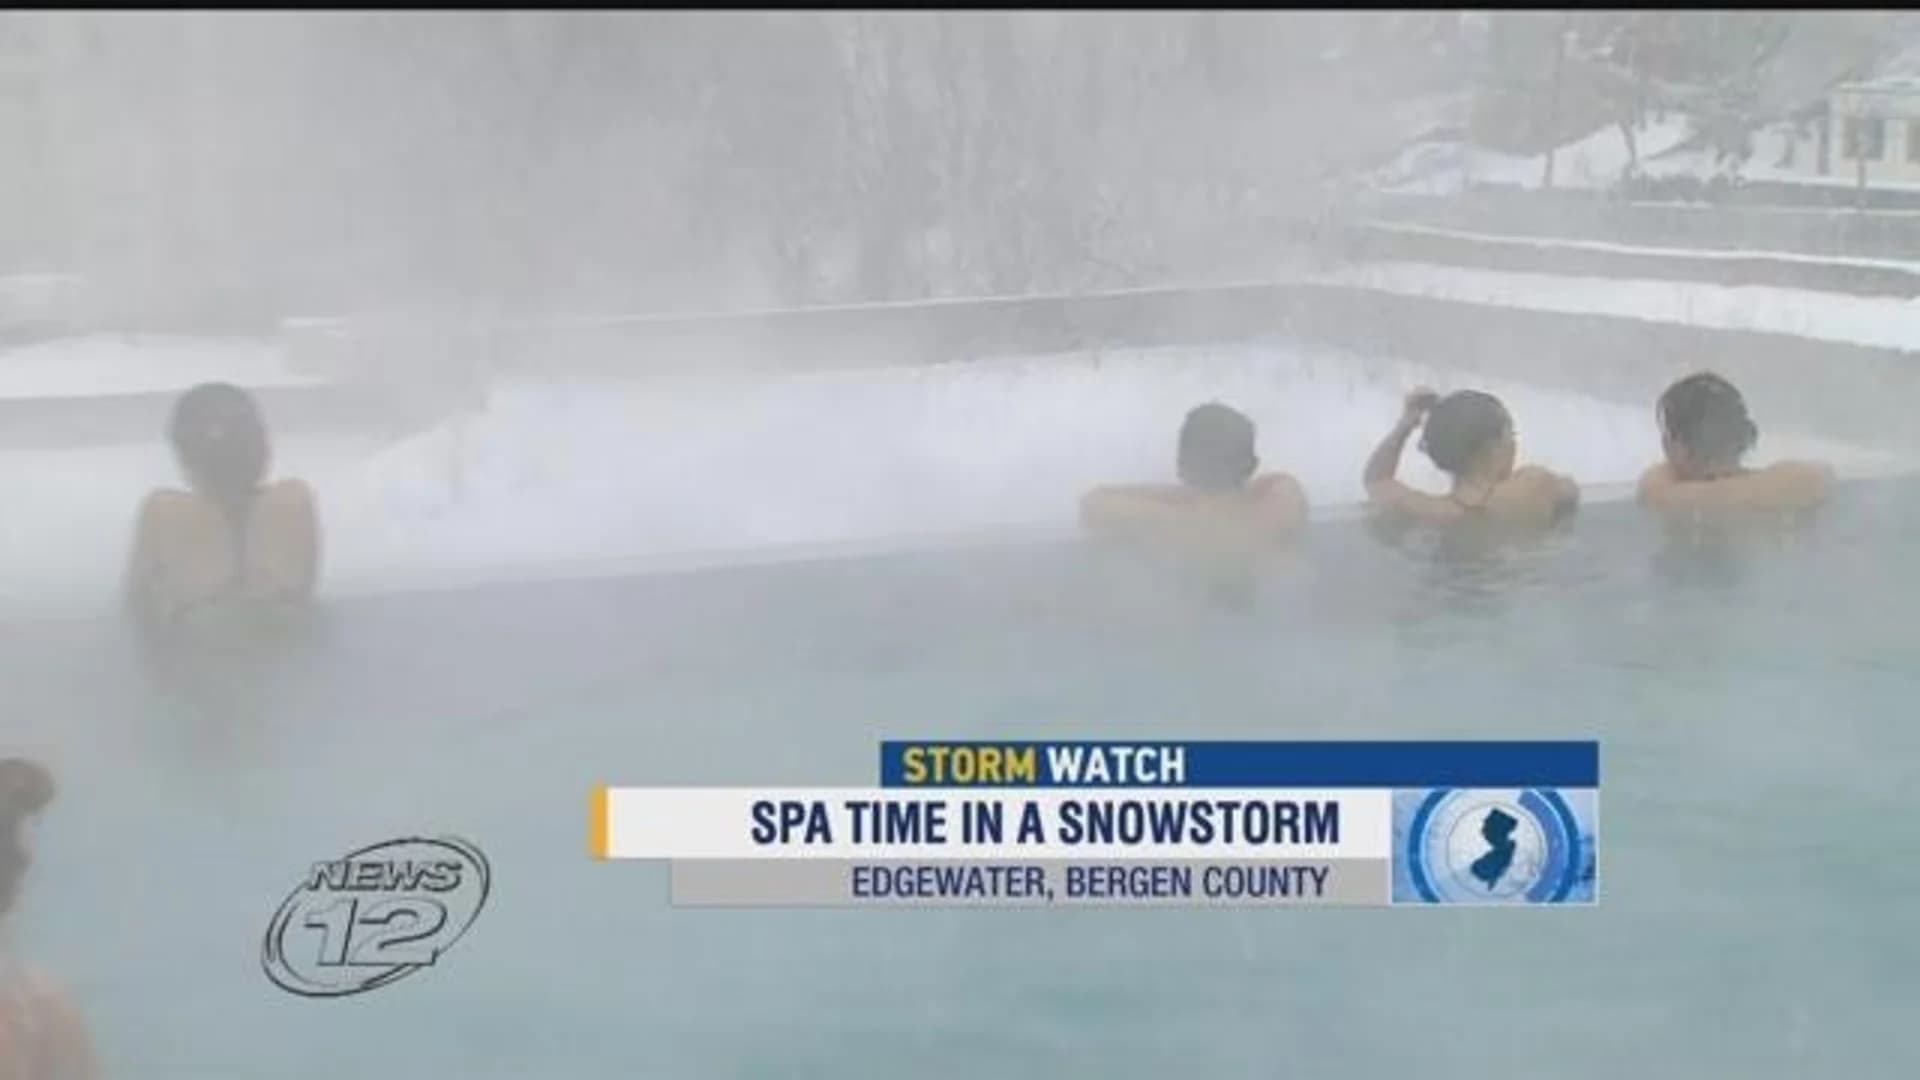 Fed up with snow, some NJ residents pamper themselves